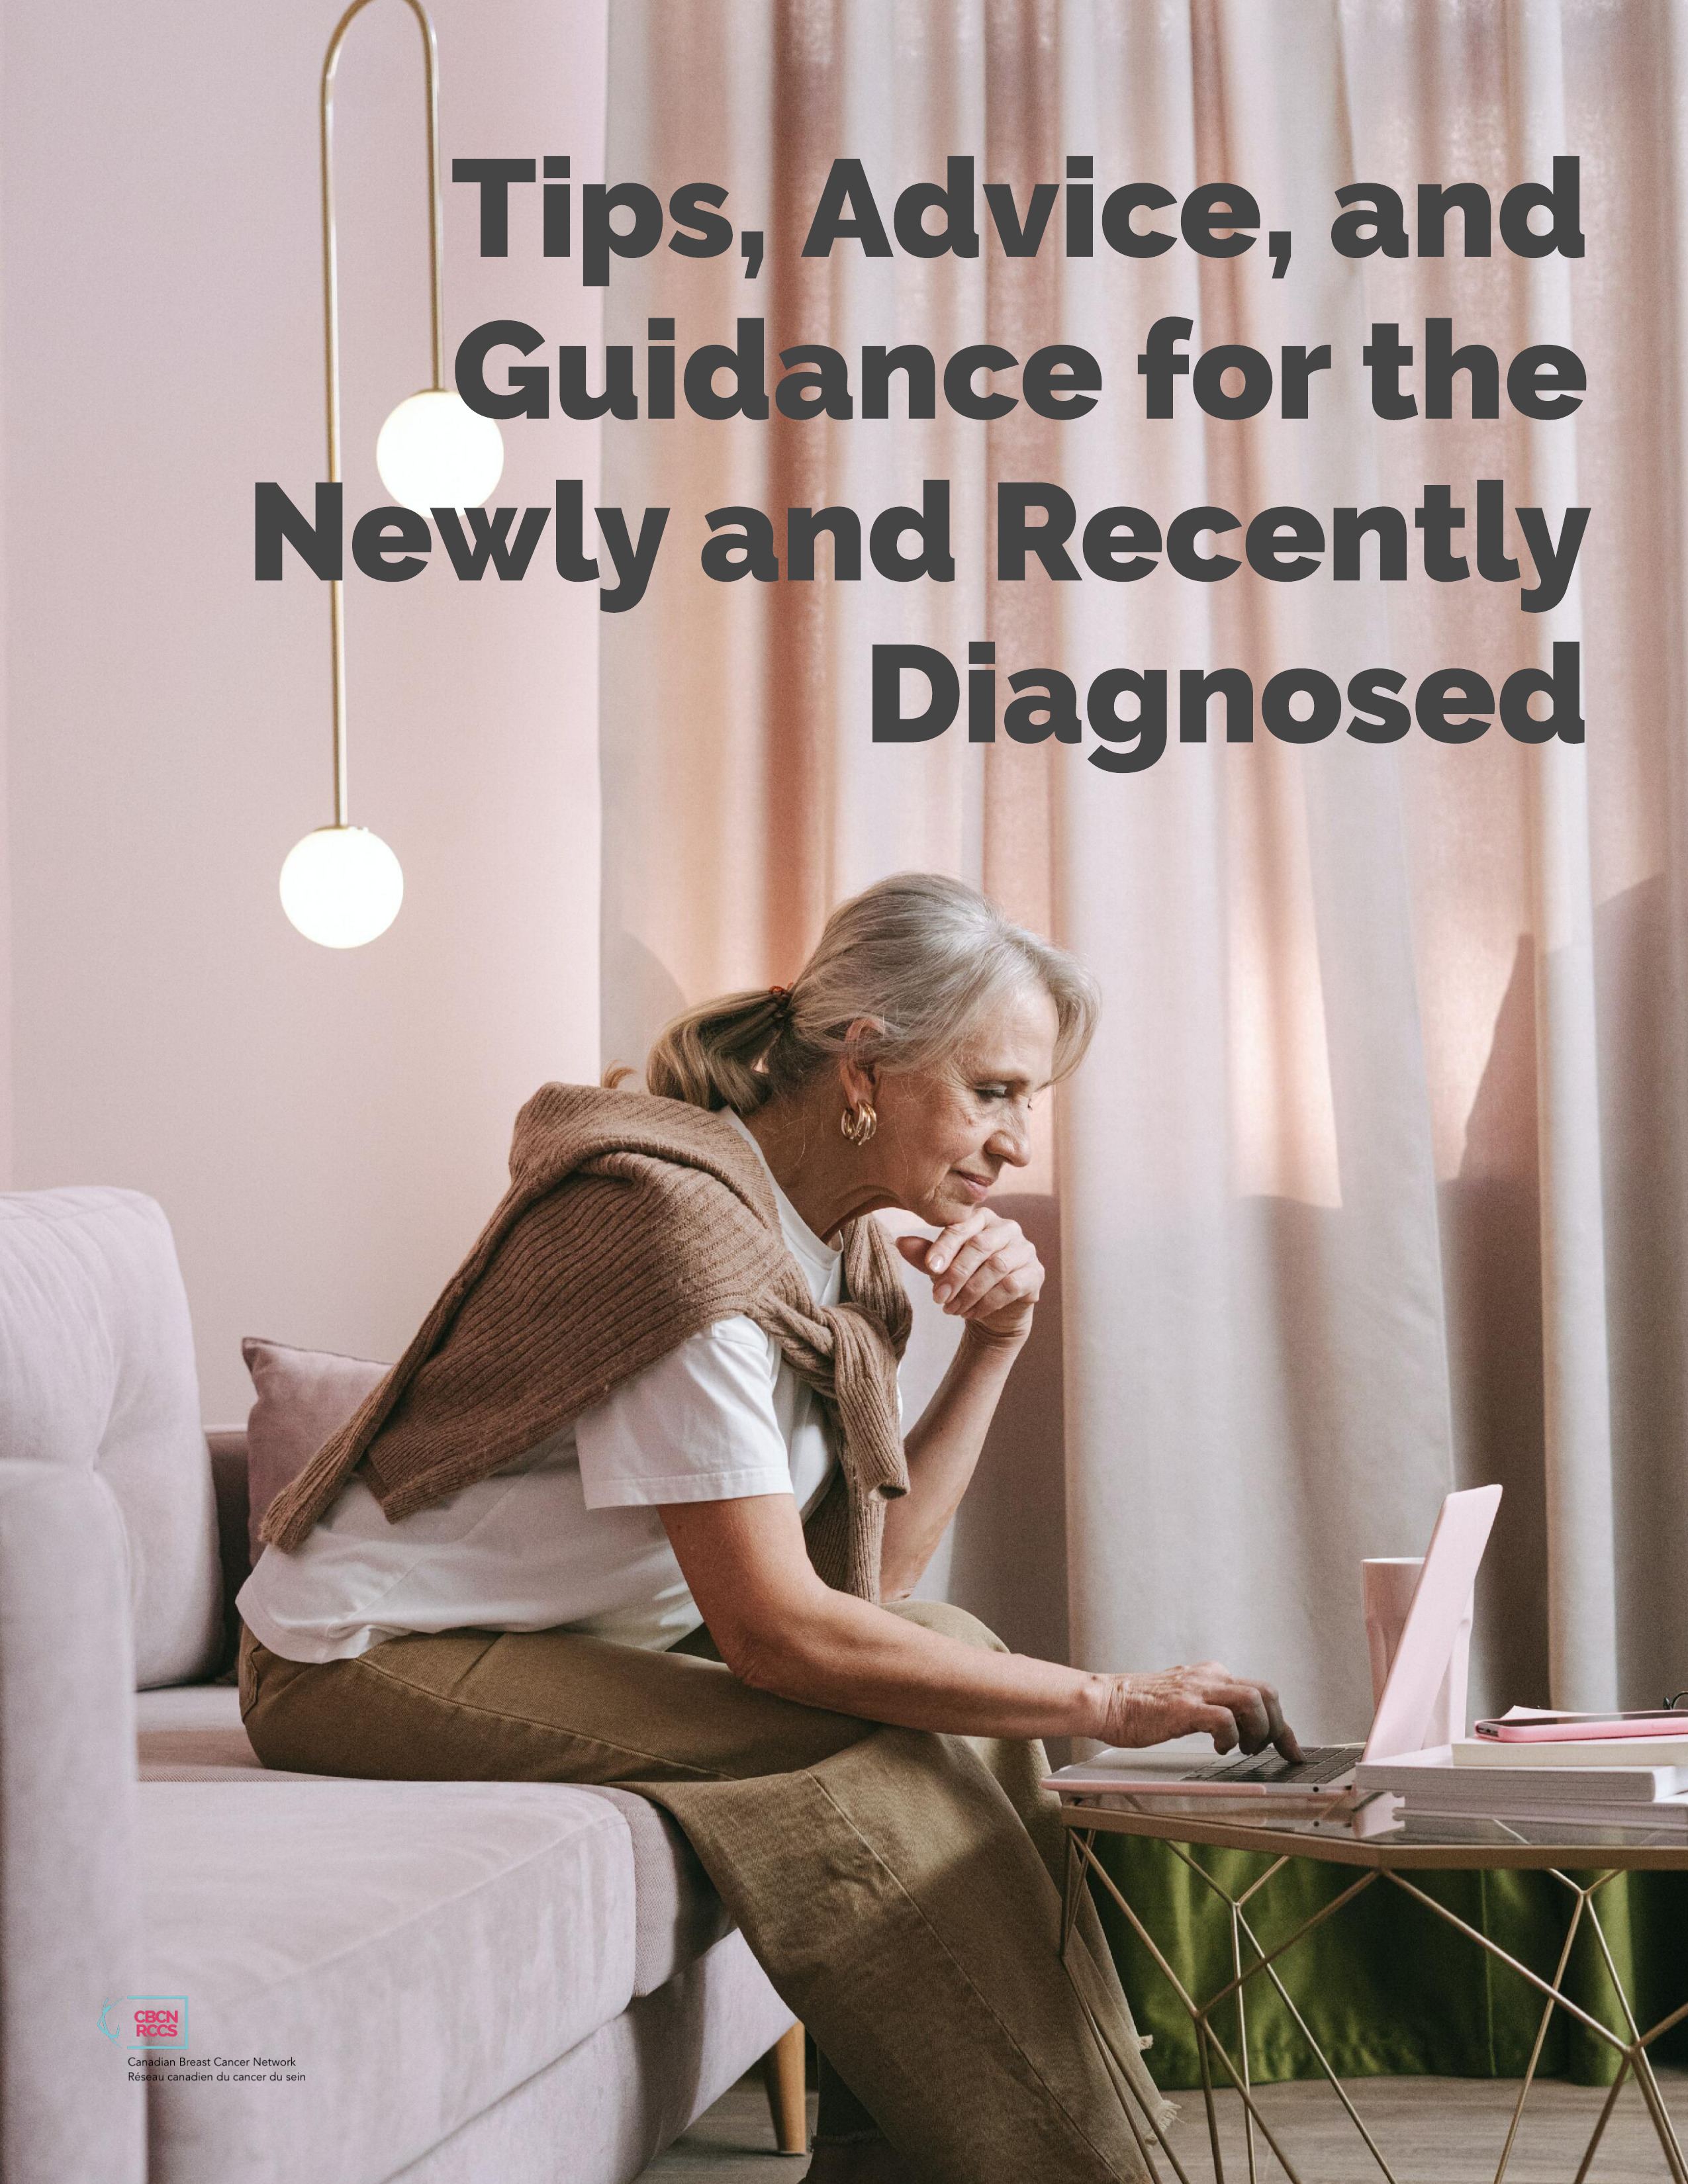 Tips, Advice, and Guidance for the Newly and Recently Diagnosed